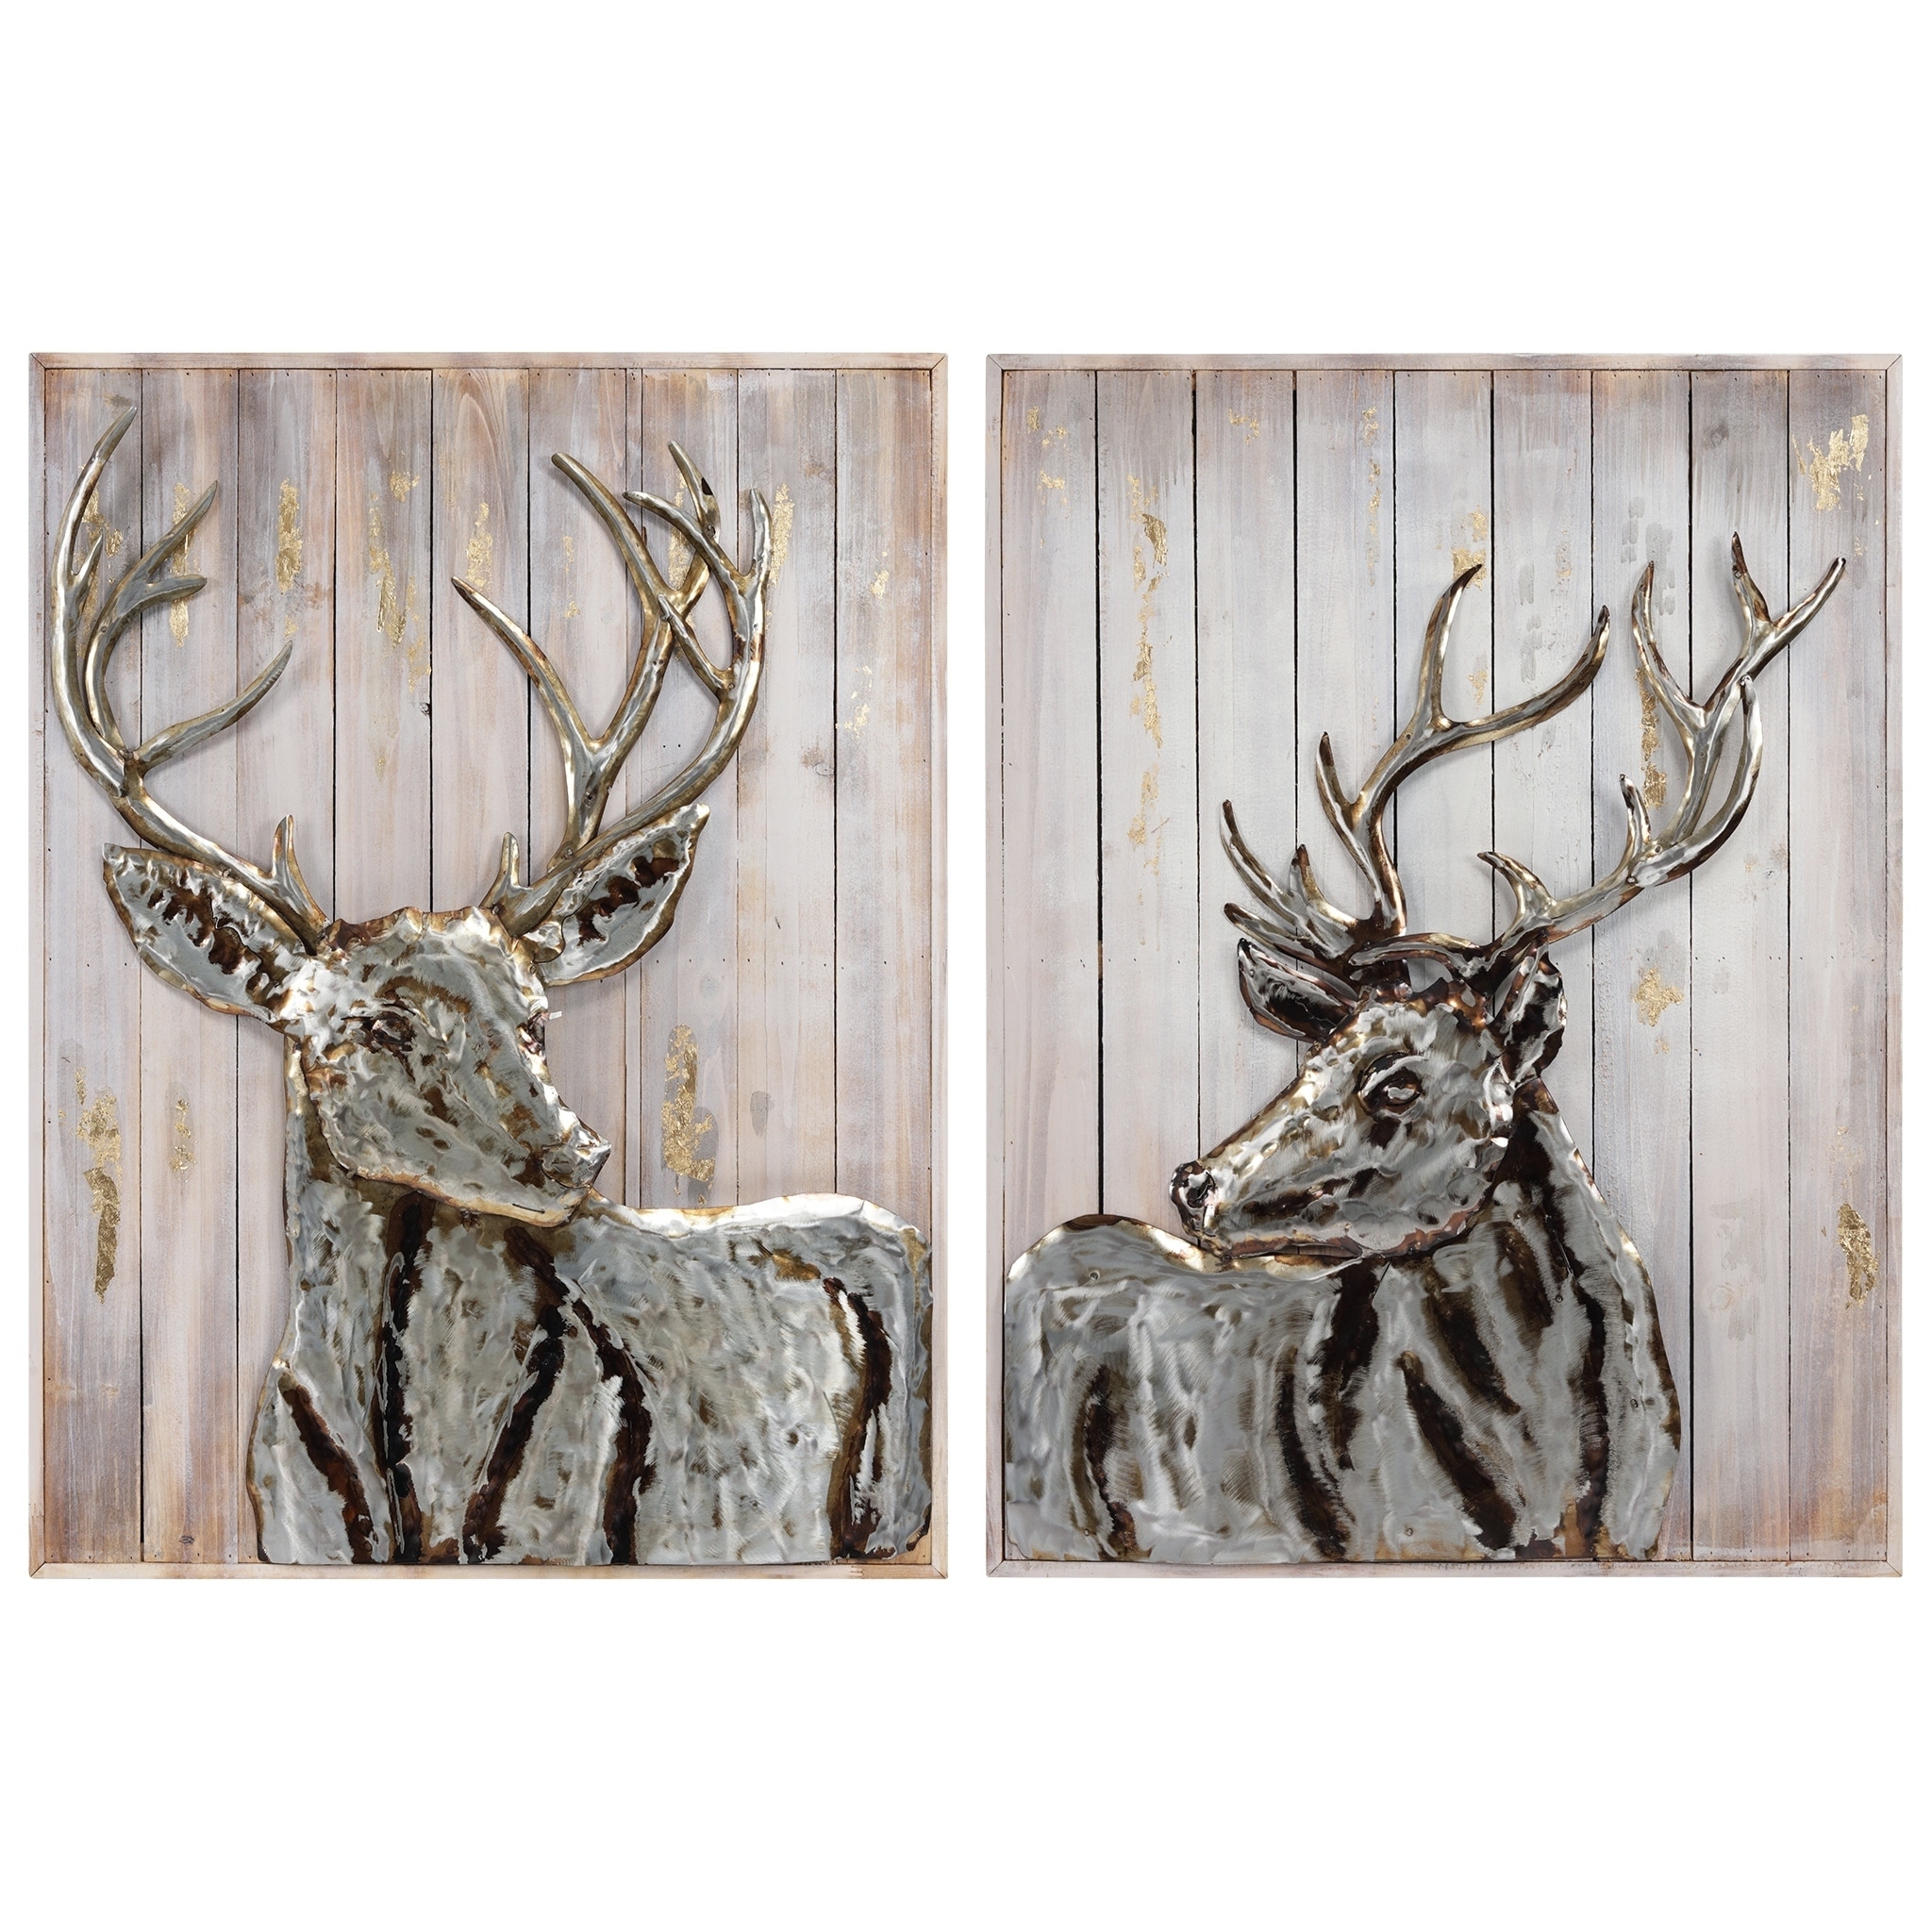 Shop Deer Handed Painted Iron Wall Sculpture On Slatted Solid Wood Wall Art Overstock 30984936